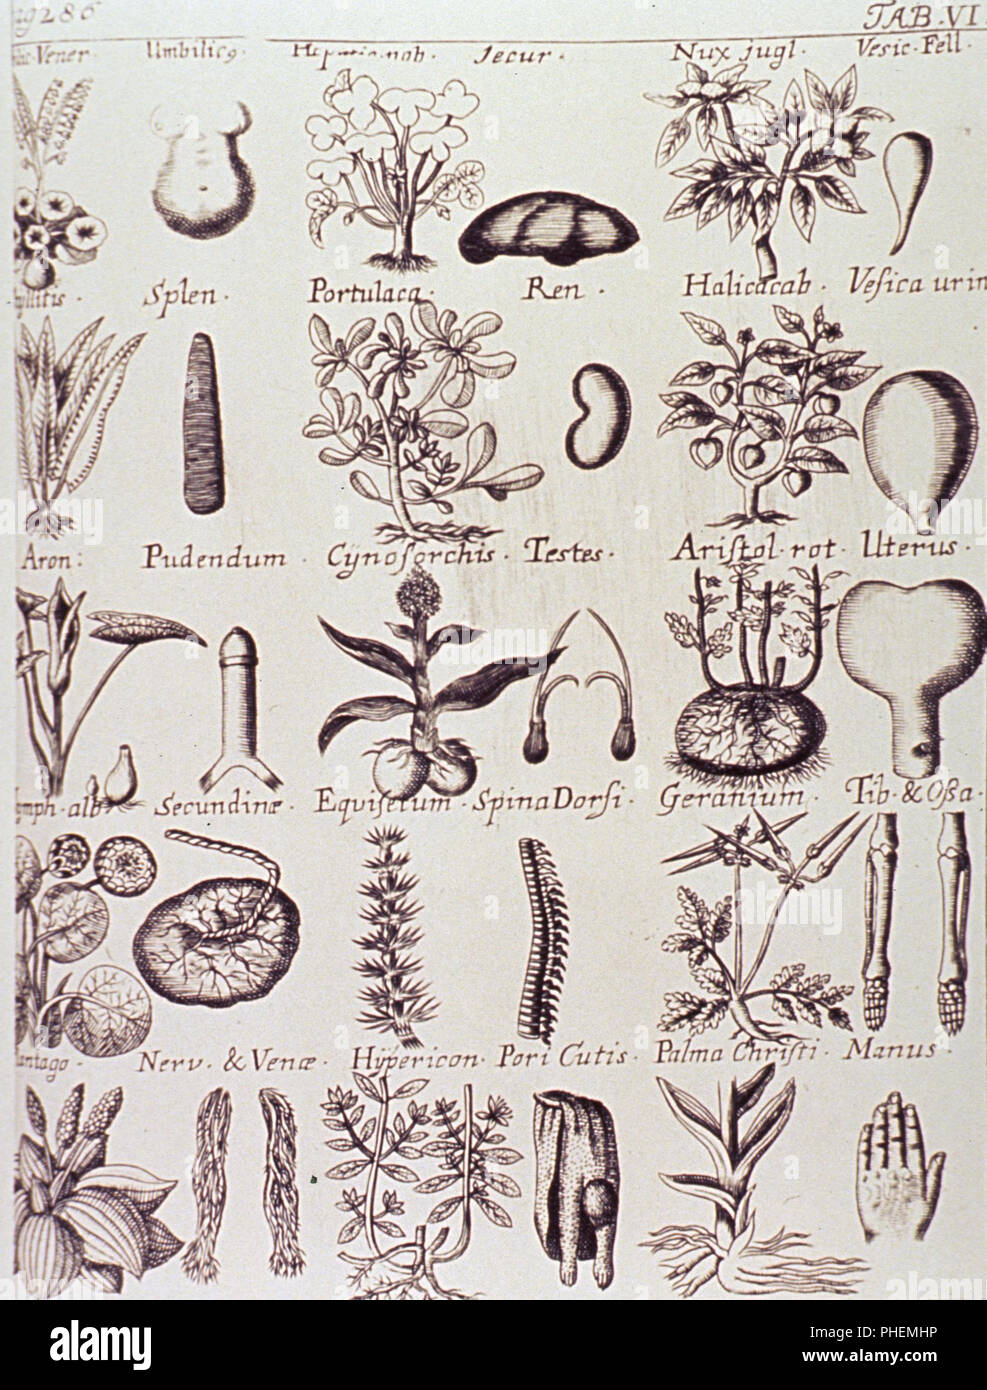 Various plants are shown along with a corresponding body part thought to benefit through some use of the plant. Stock Photo